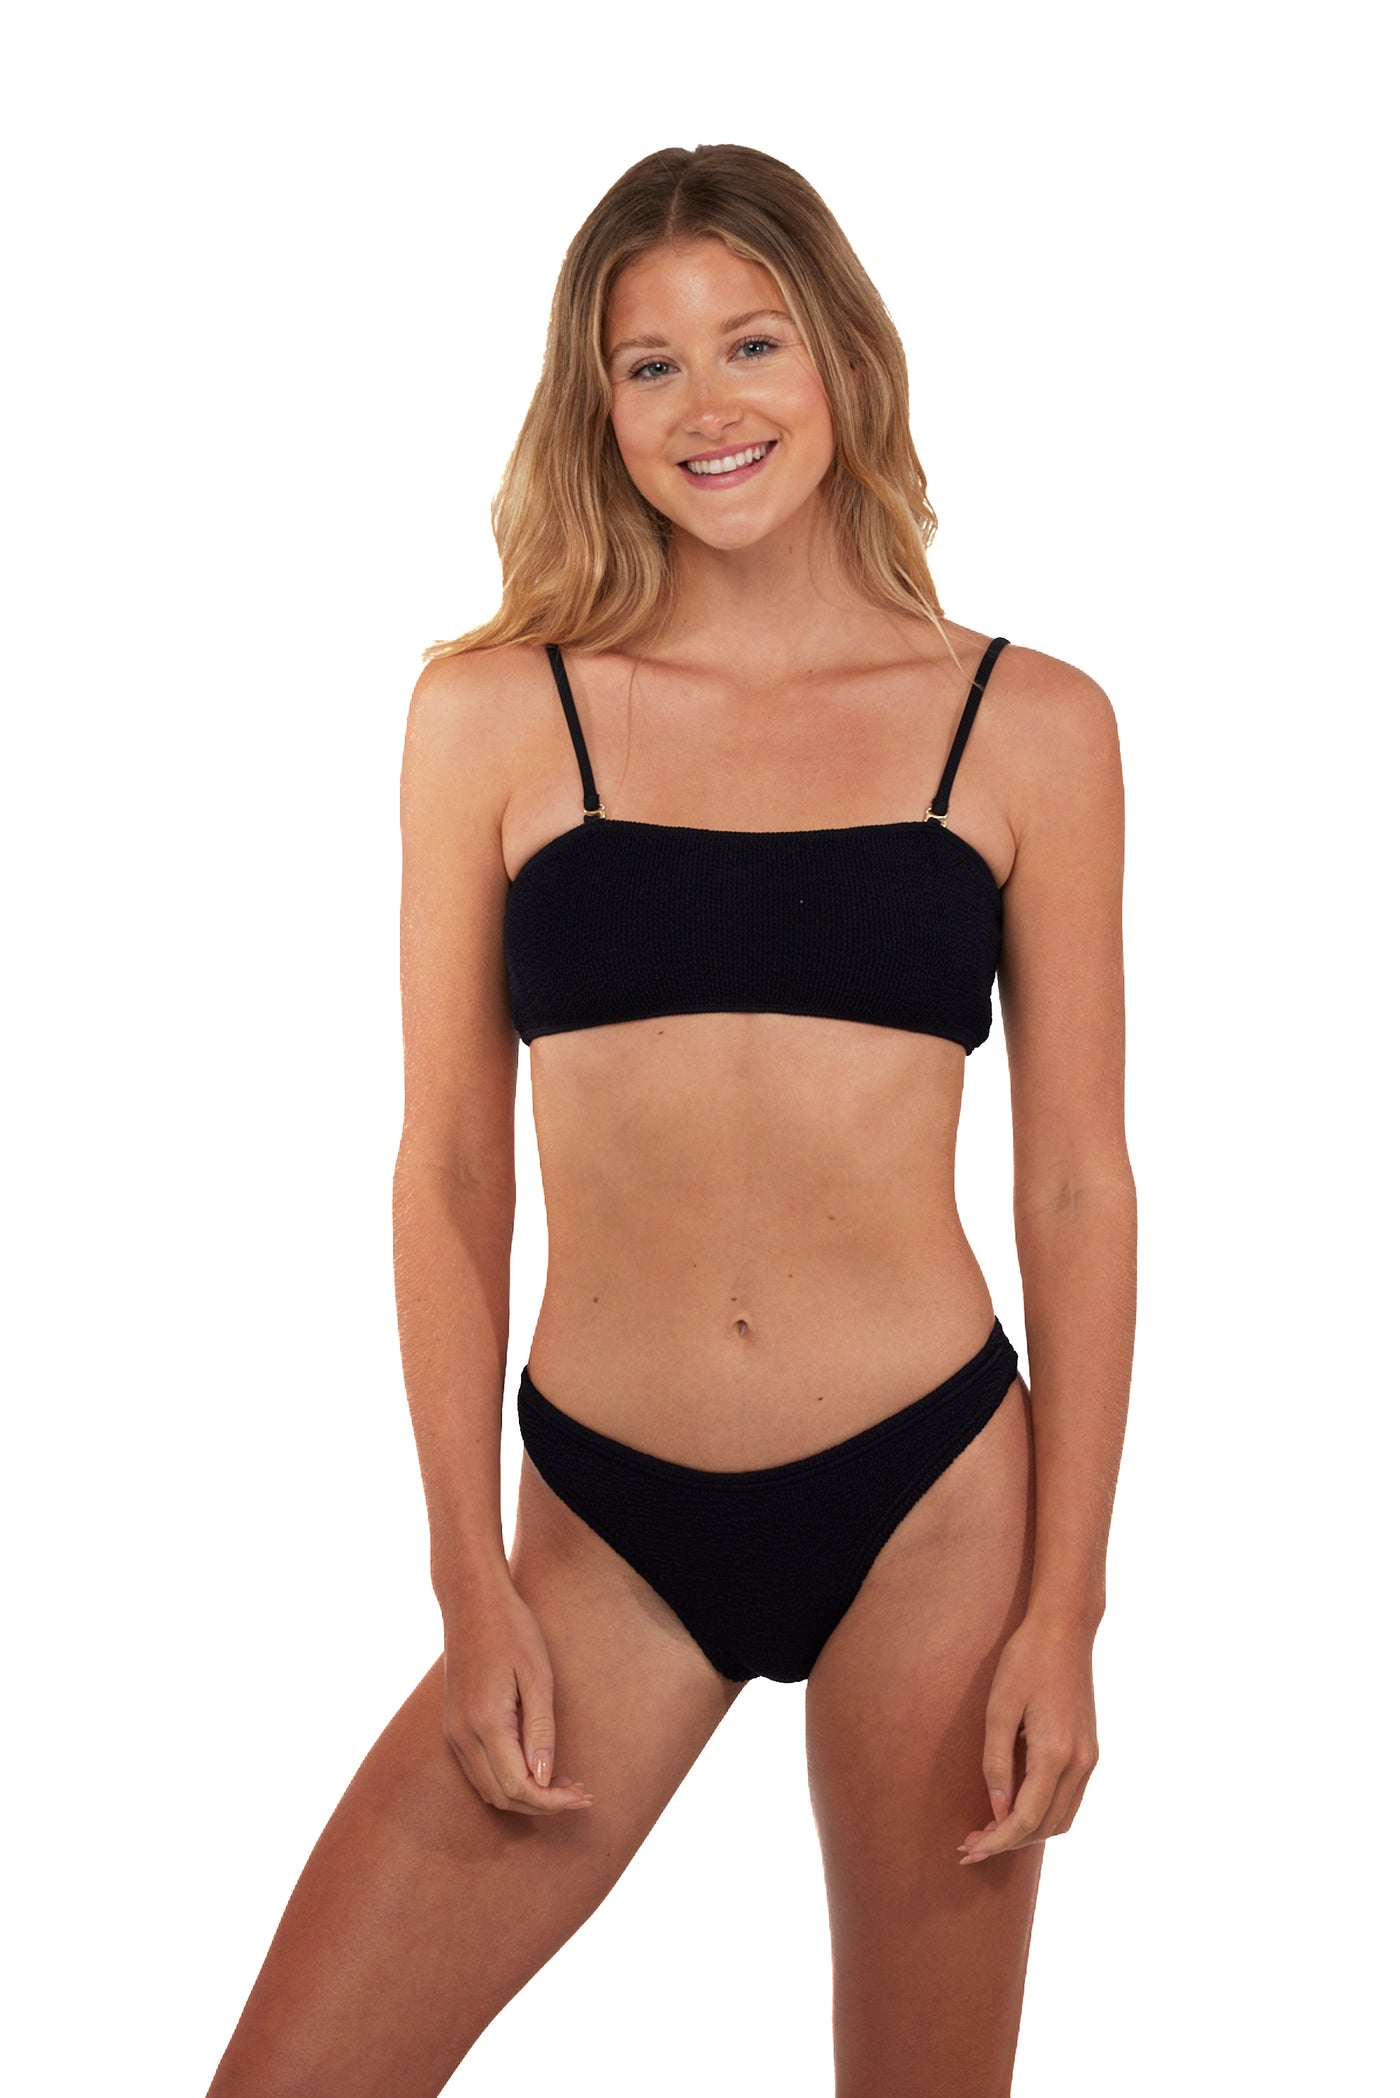 Turks And Caicos Tube with Straps One Size Bikini TOP ONLY (Black)